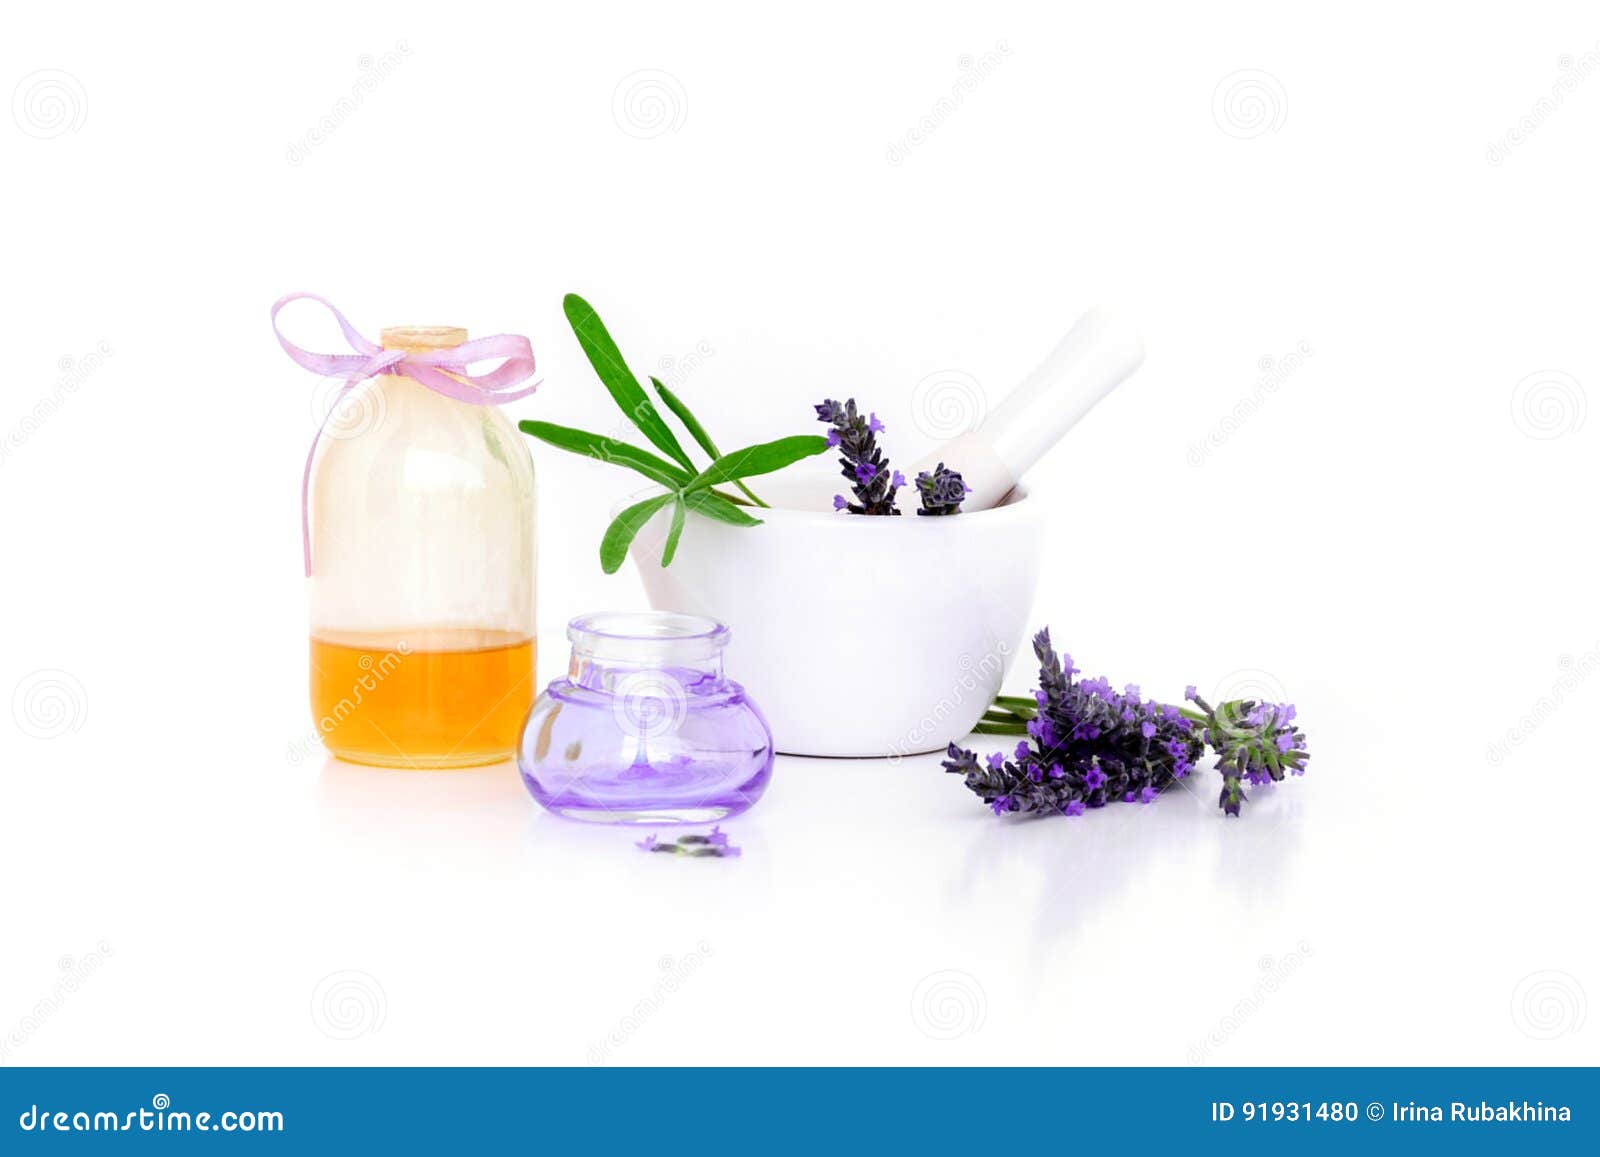 lavender flowers, lavander extract, oil and montar with dry flowers  on white